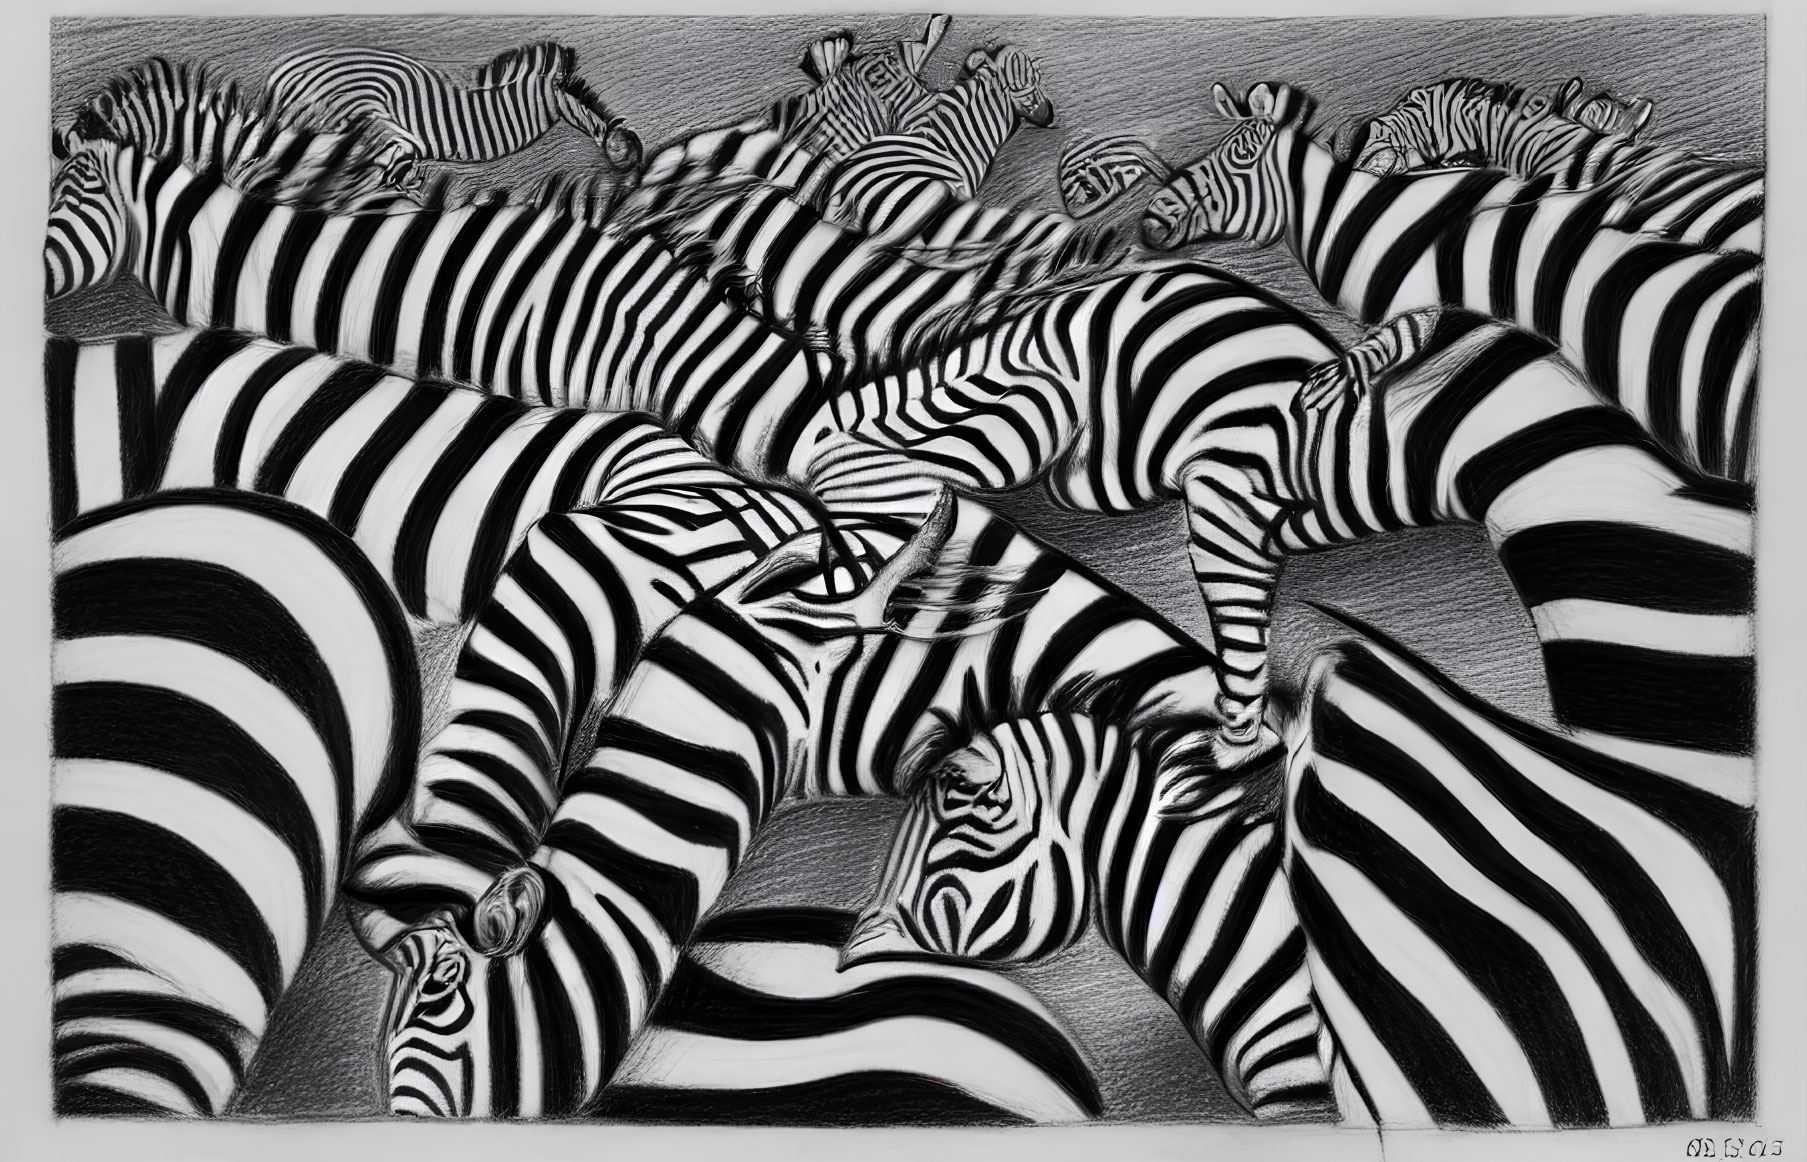 Herd of Zebras with Distinctive Black and White Stripes